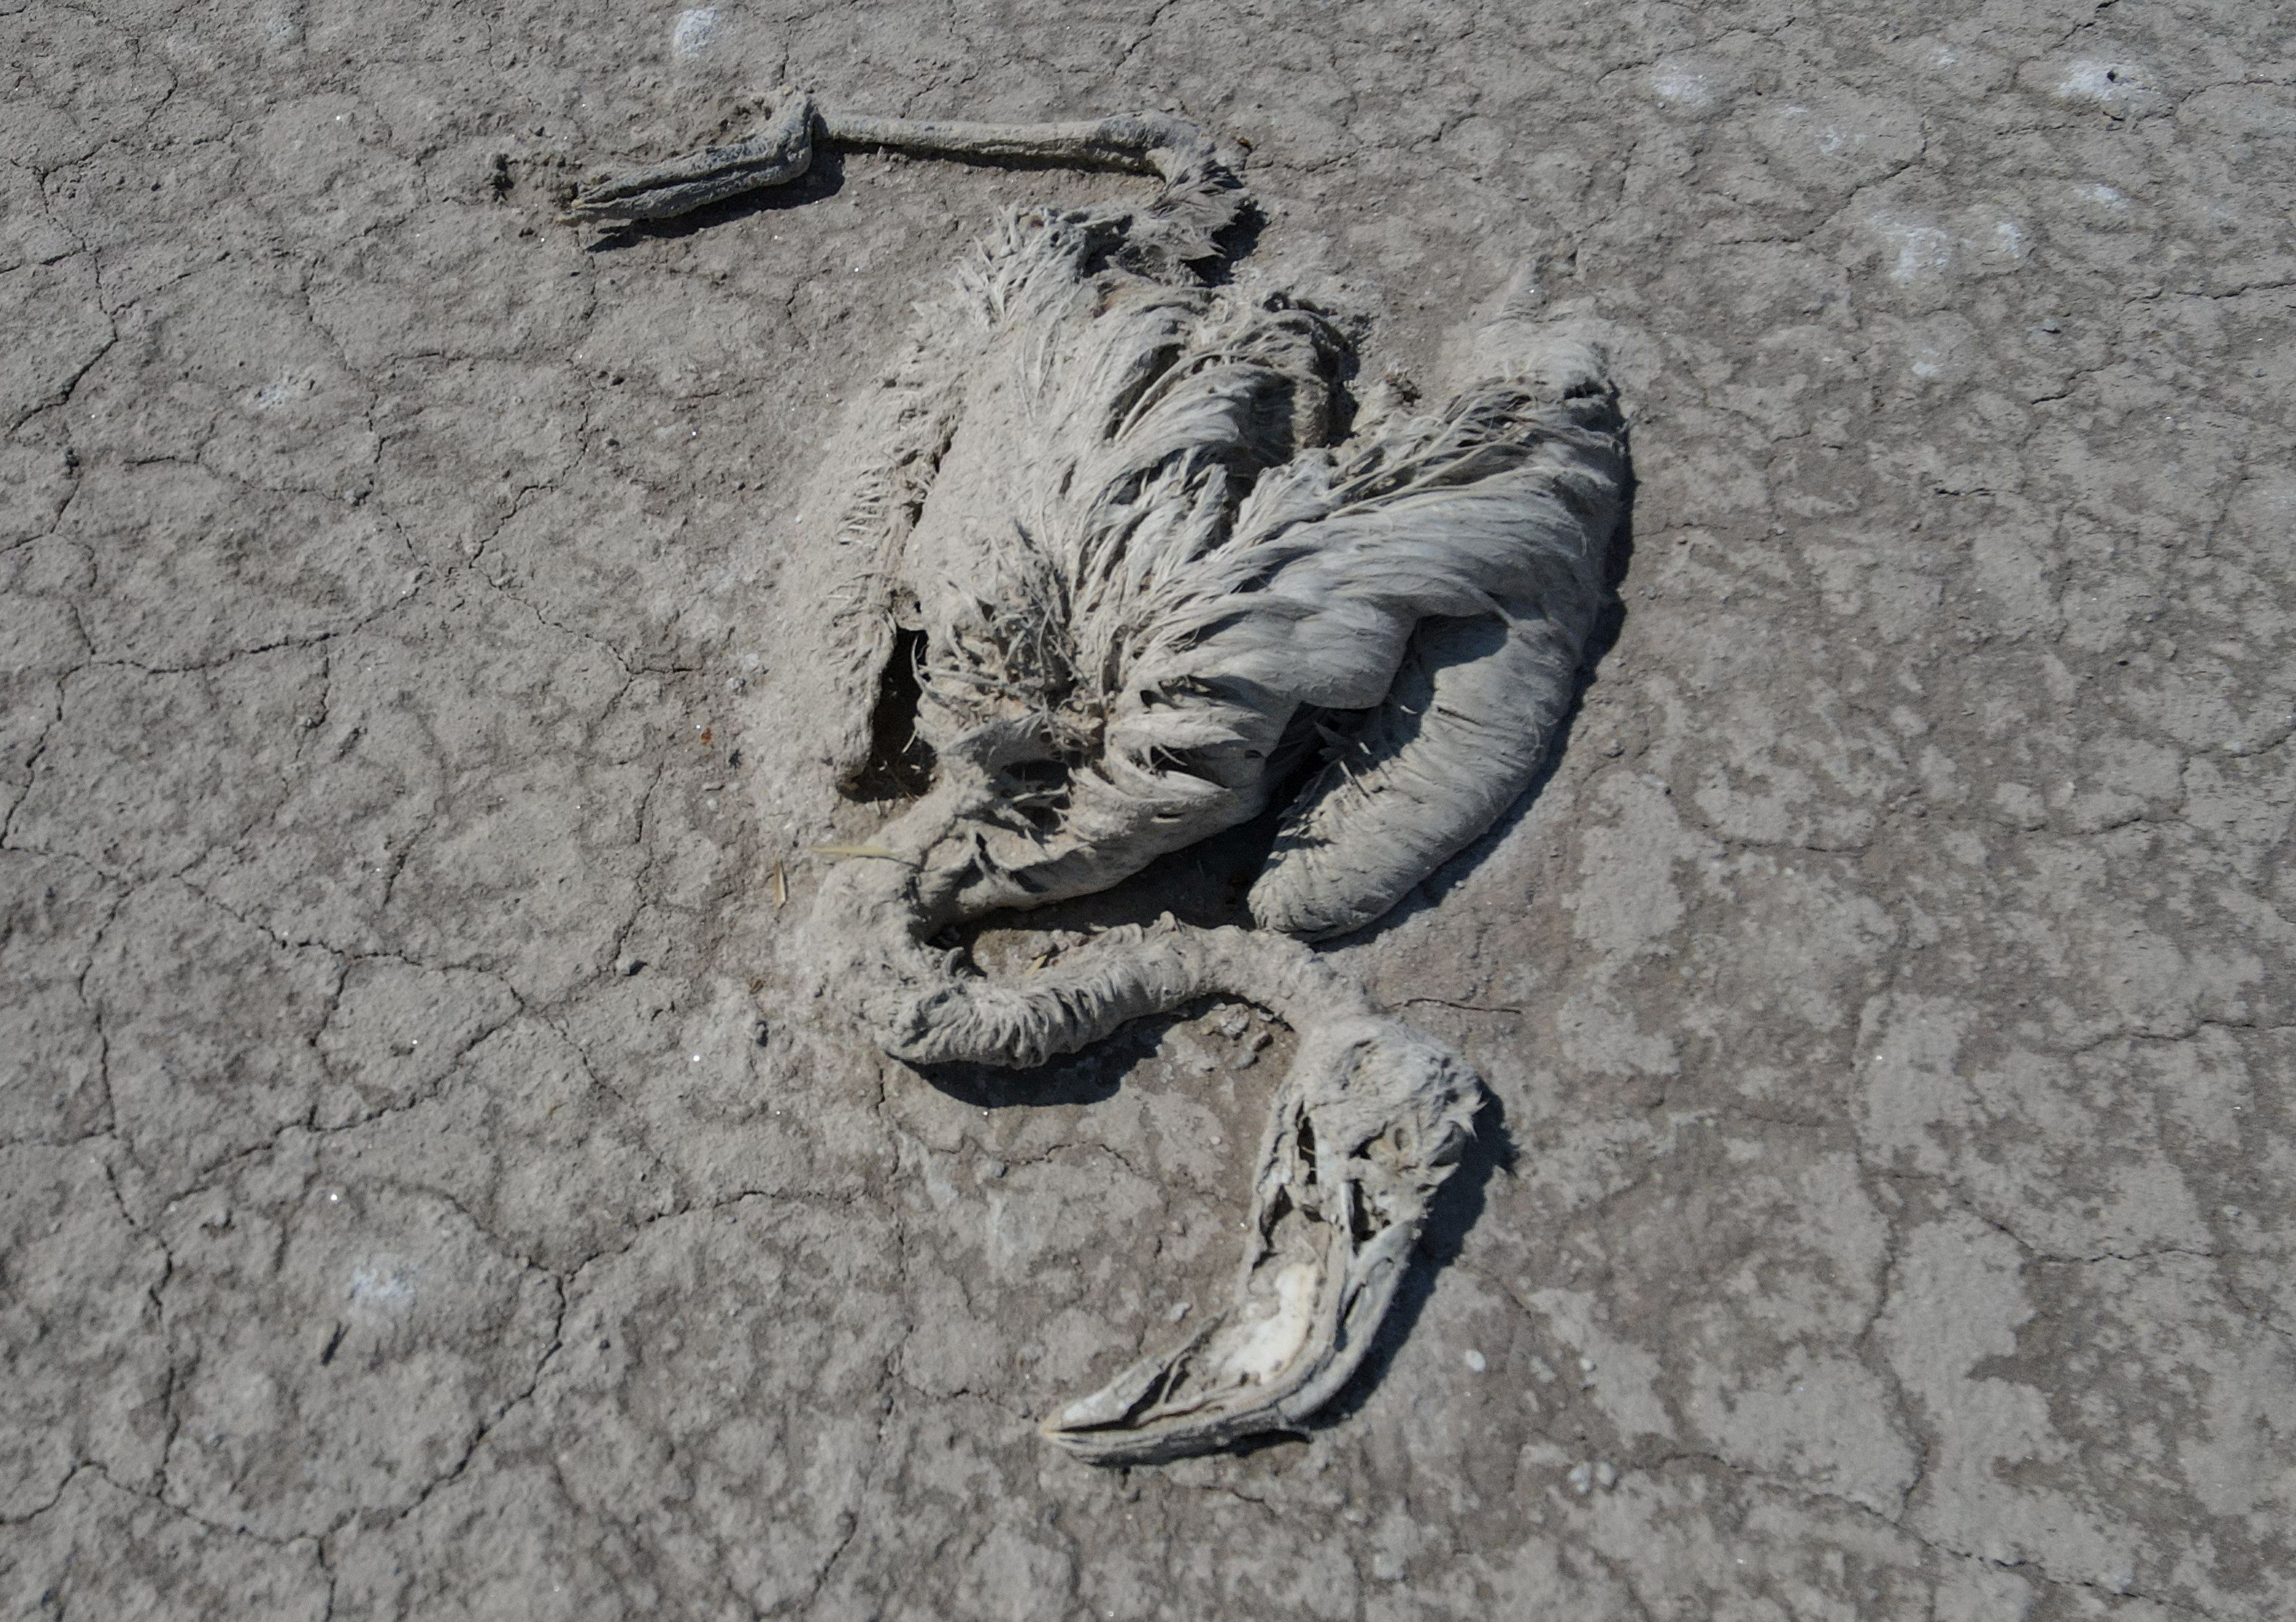 The remains of a flamingo that died of drought is seen in Turkey's Lake Tuz